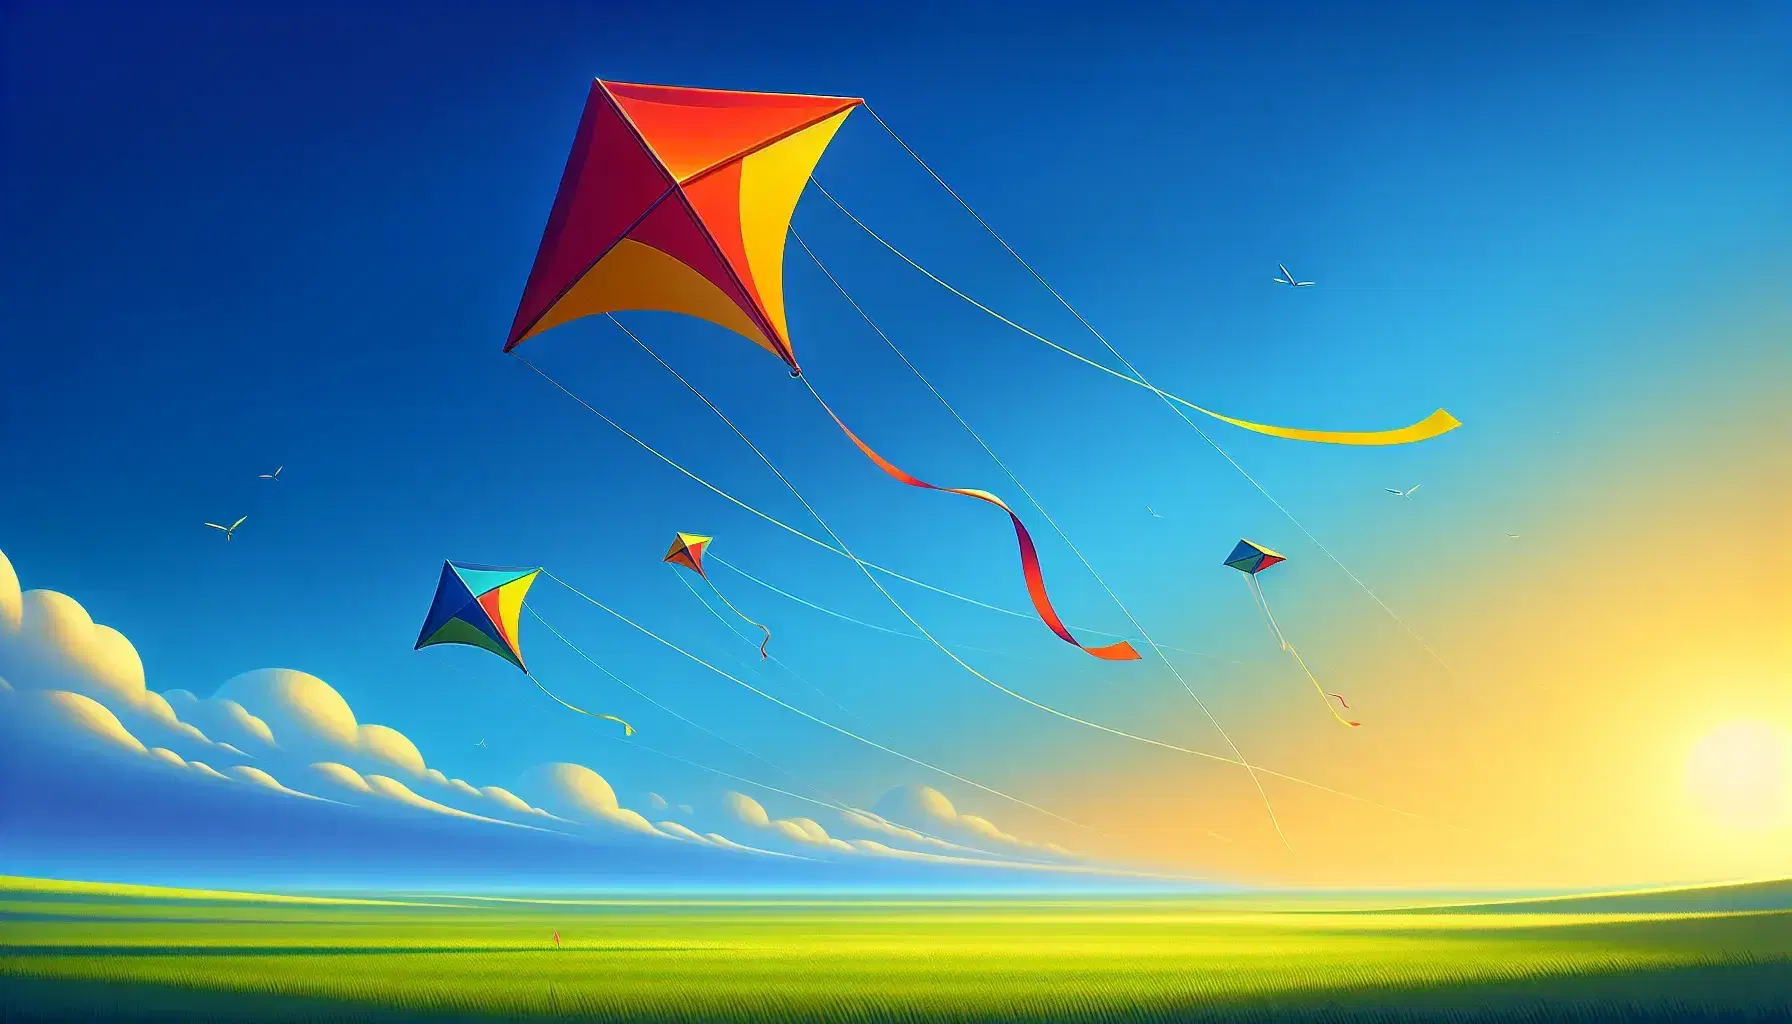 Three colorful kites—a red diamond, a yellow triangle, and a blue quadrilateral—fly in a clear blue sky above a green field with visible shadows.